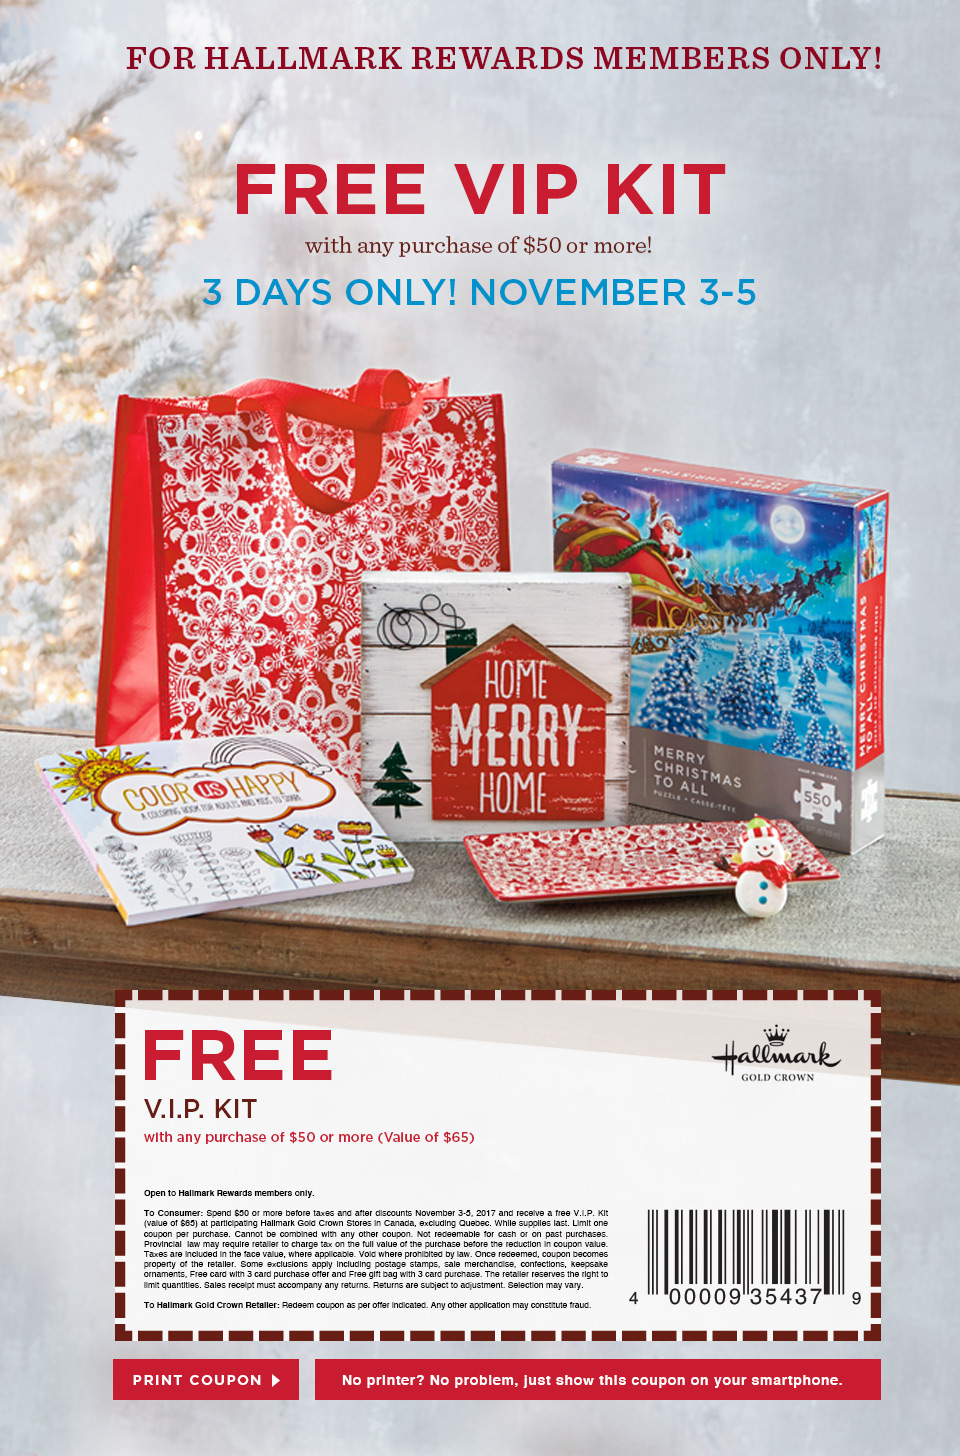 FREE VIP KIT - with any purchase of $50 or more!